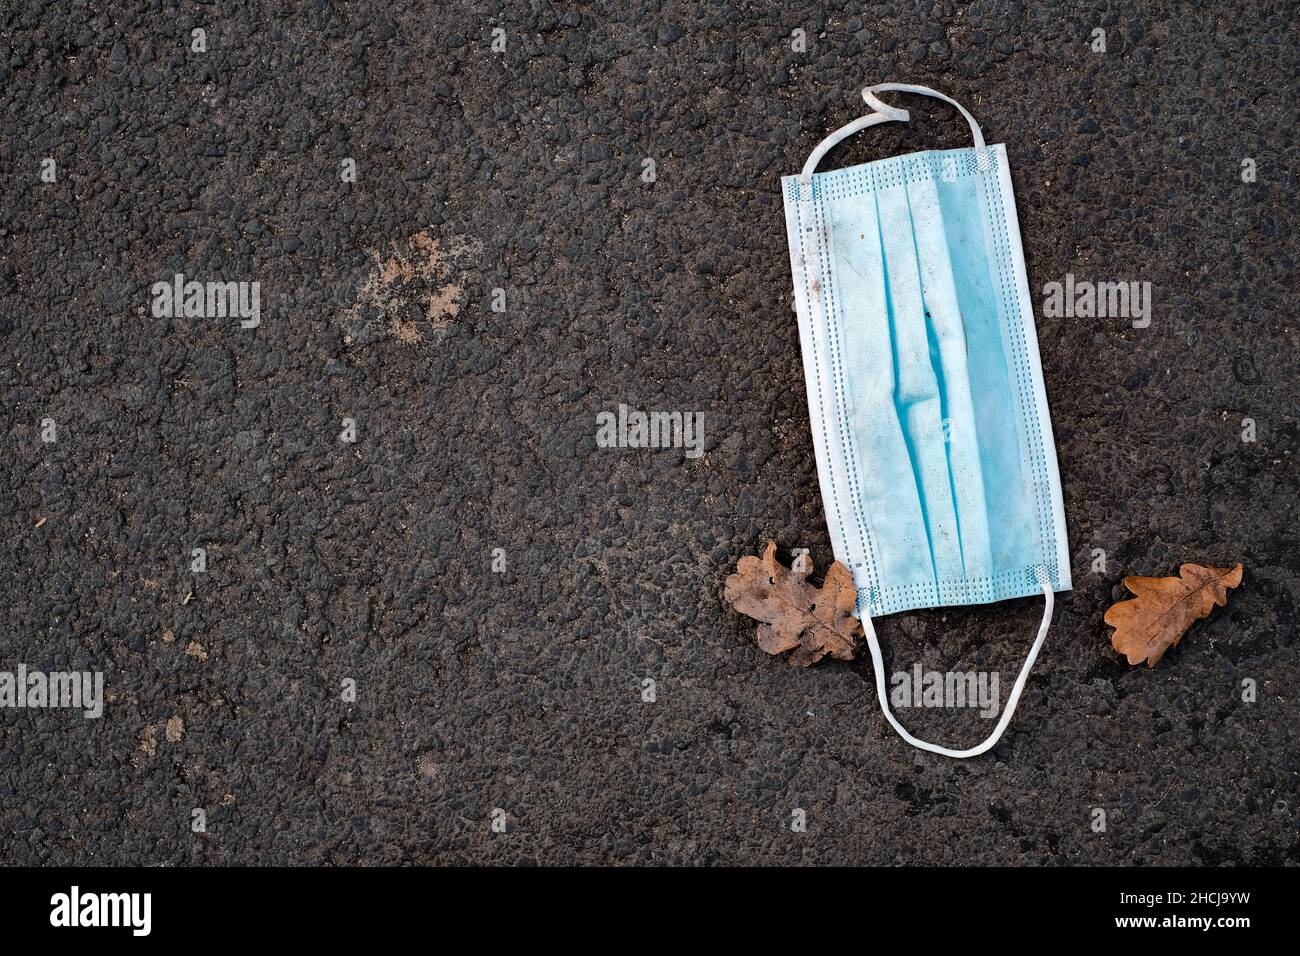 Medicine mask lying on the asphalt next to two autumn leaves Stock Photo